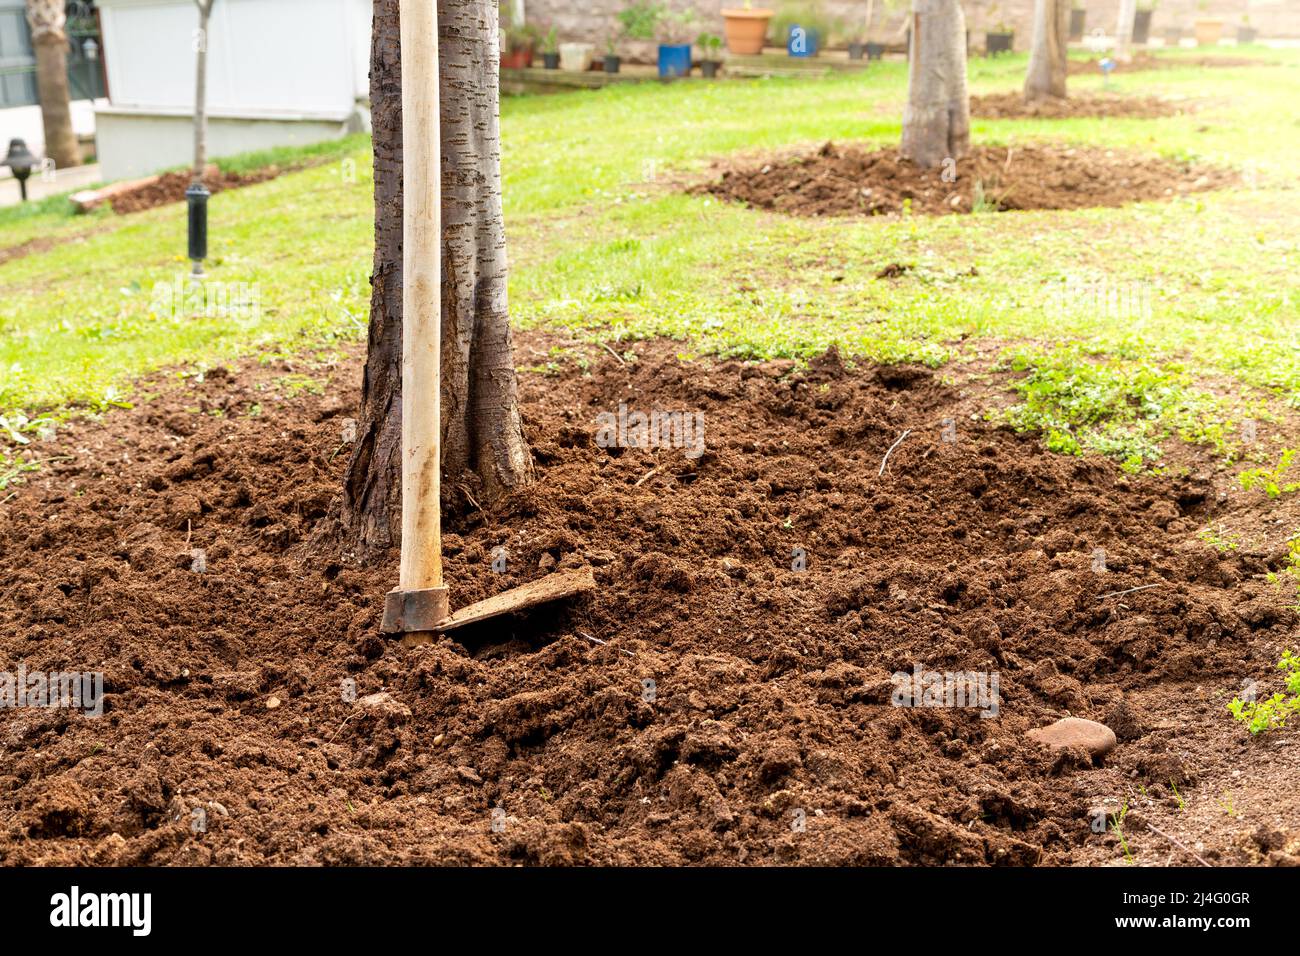 Fruit tree and horticultural hoe leaning on it, selective focus. The soil under the fruit trees is hoeed for aeration. Spring, gardening concept. Stock Photo